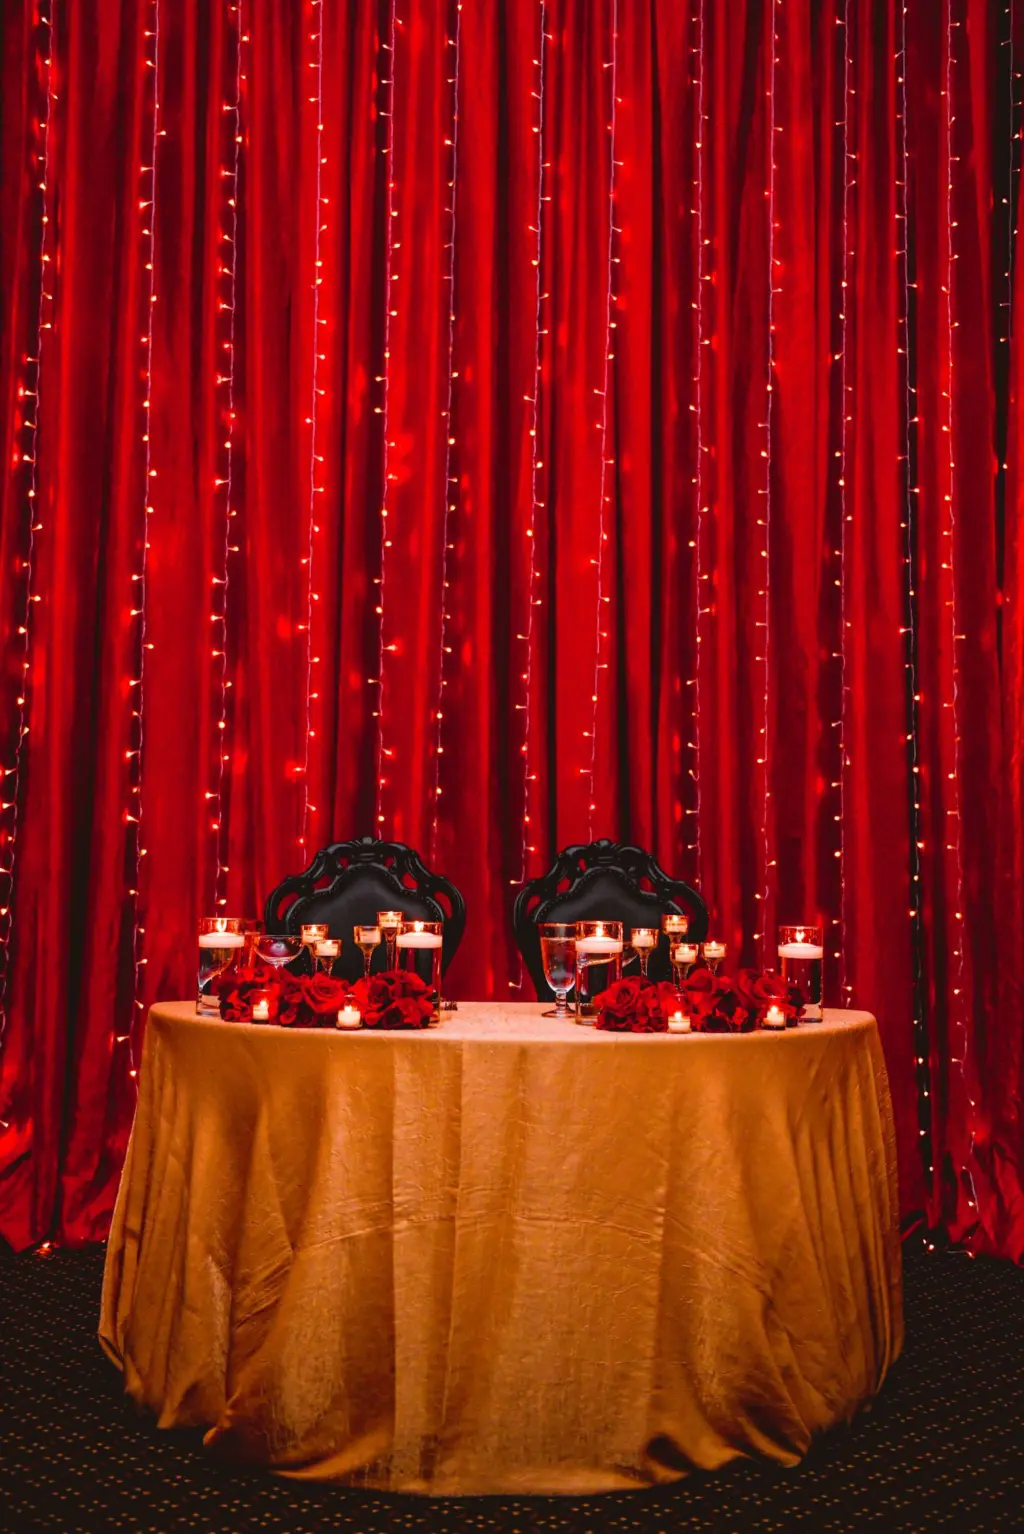 Sweetheart Table with Red Roses and Floating Candles on a Gold Linen with Black Chairs | Tampa Rental Company A Chair Affair | Red Pipe and Drape Backdrop with Twinkle Light Curtain